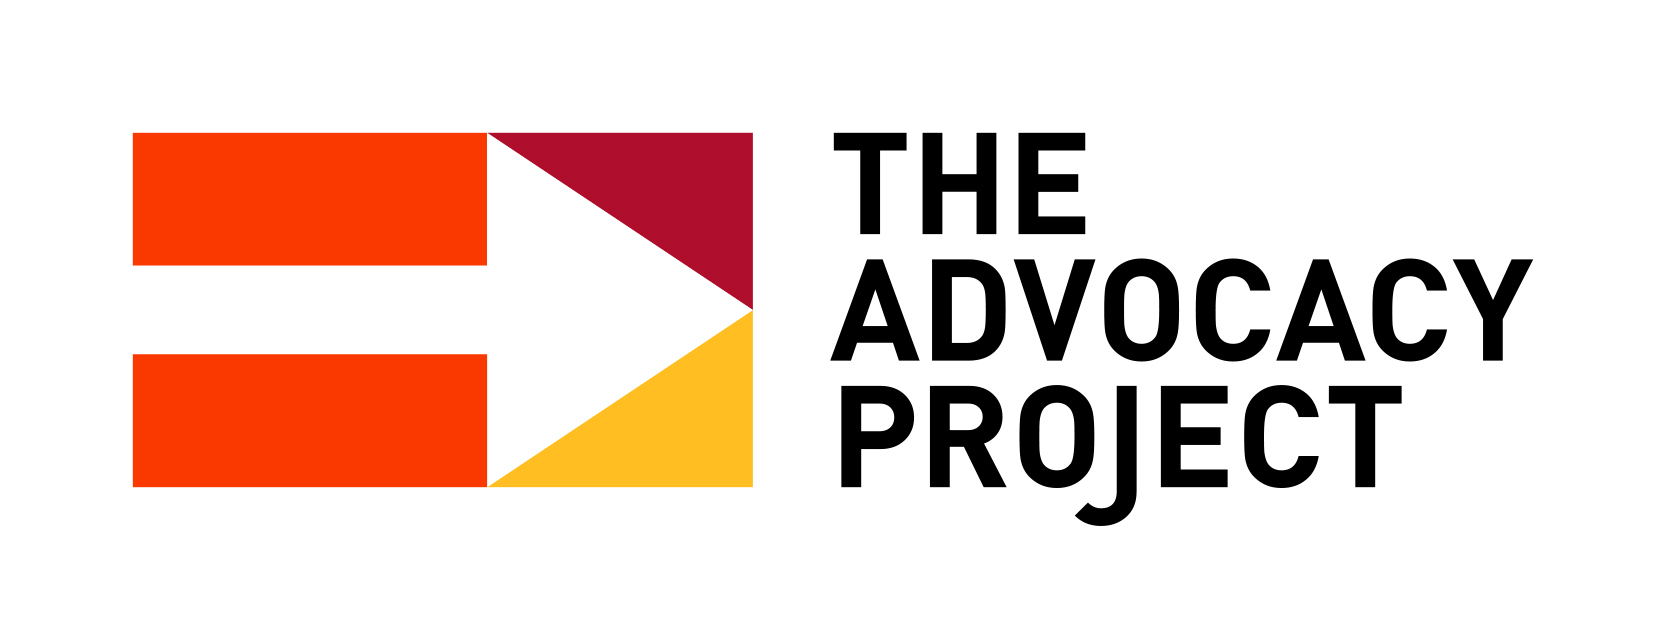 The Advocacy Project Logo